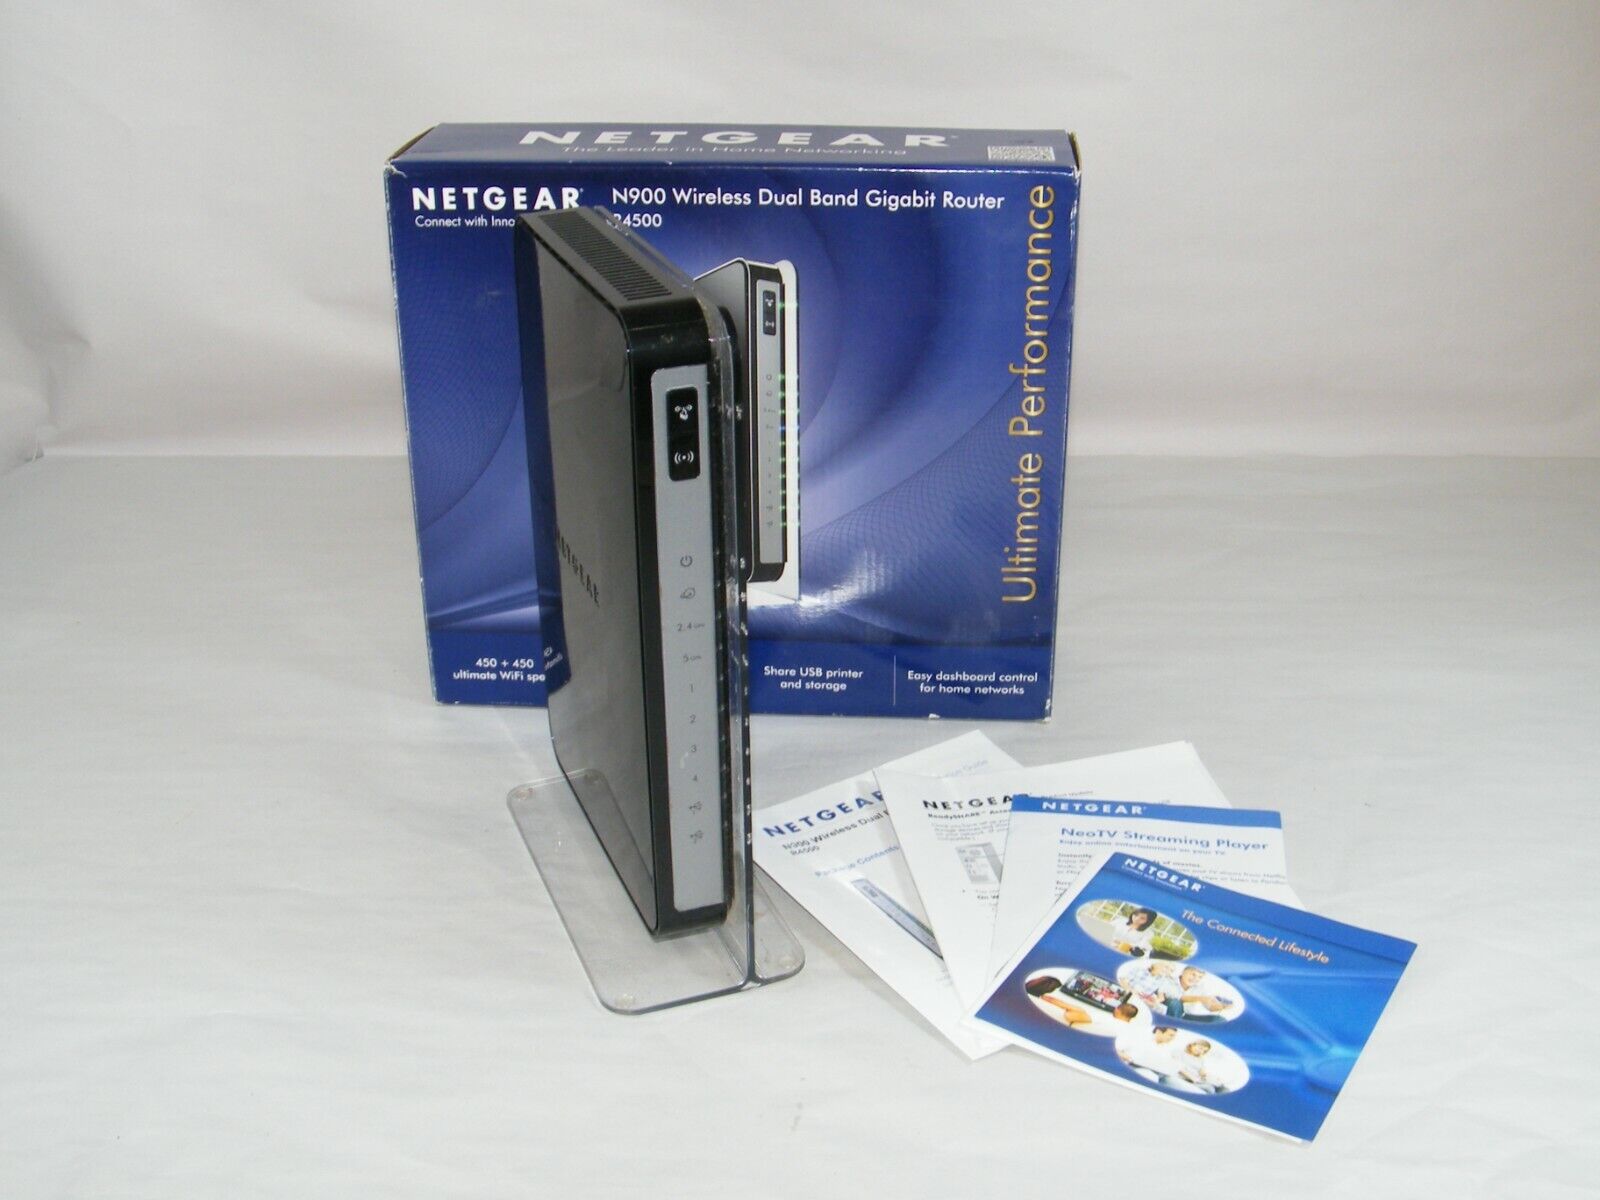 NETGEAR N900 WIRELESS DUAL BAND GIGABIT ROUTER, R4500, NO POWER / CORDS INCLUDED